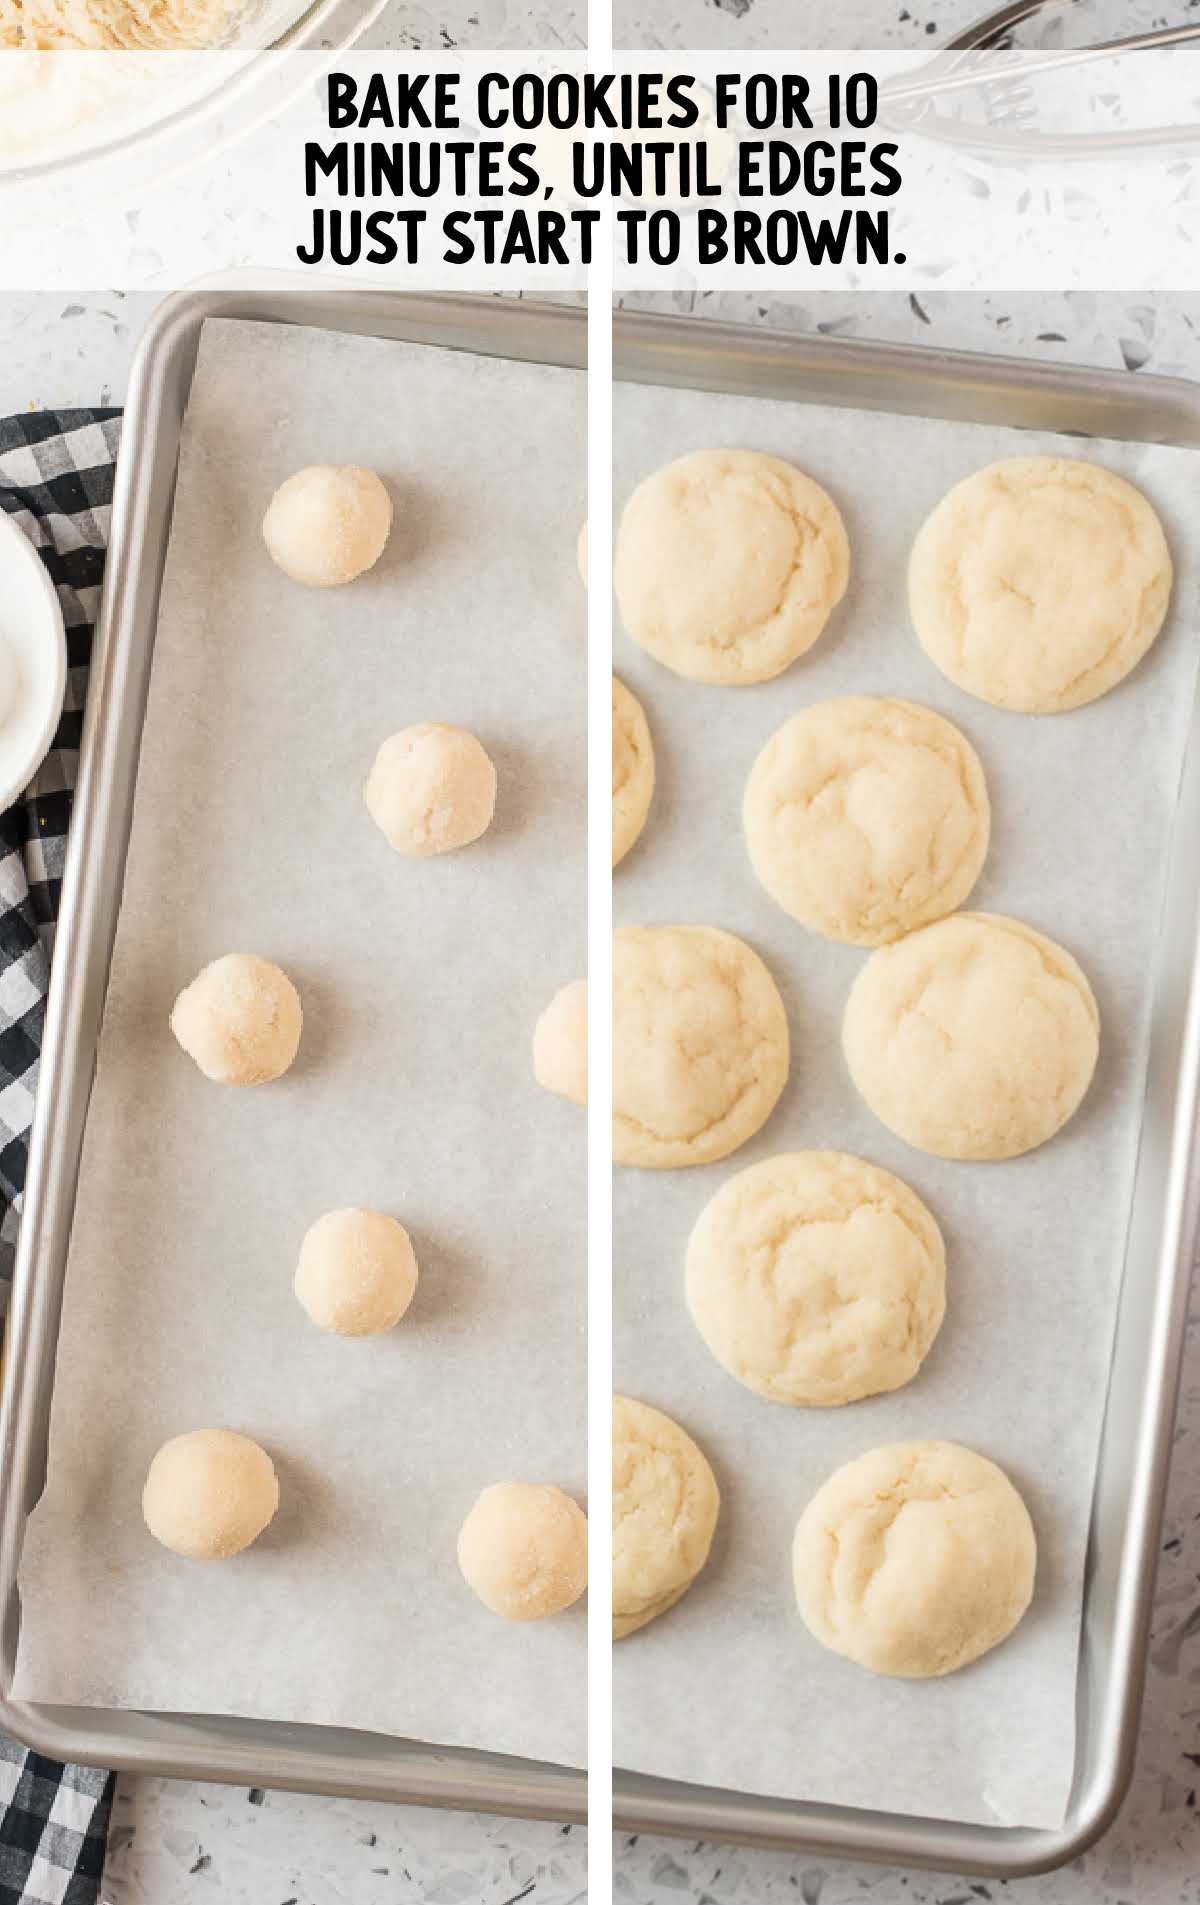 scoops of cookie dough placed on a baking sheet then baked